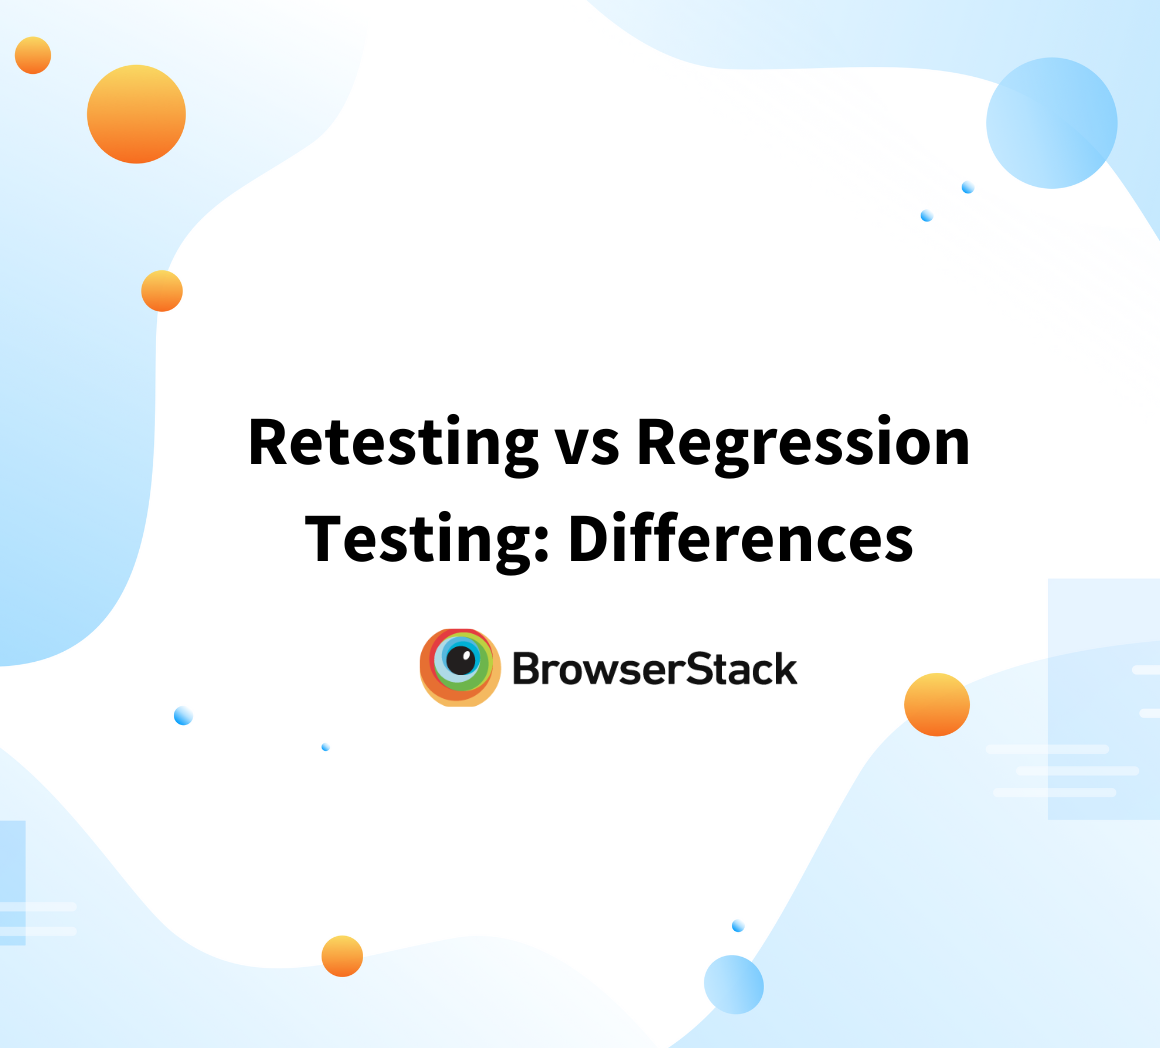 What is the difference between Retesting and Regression Testing?